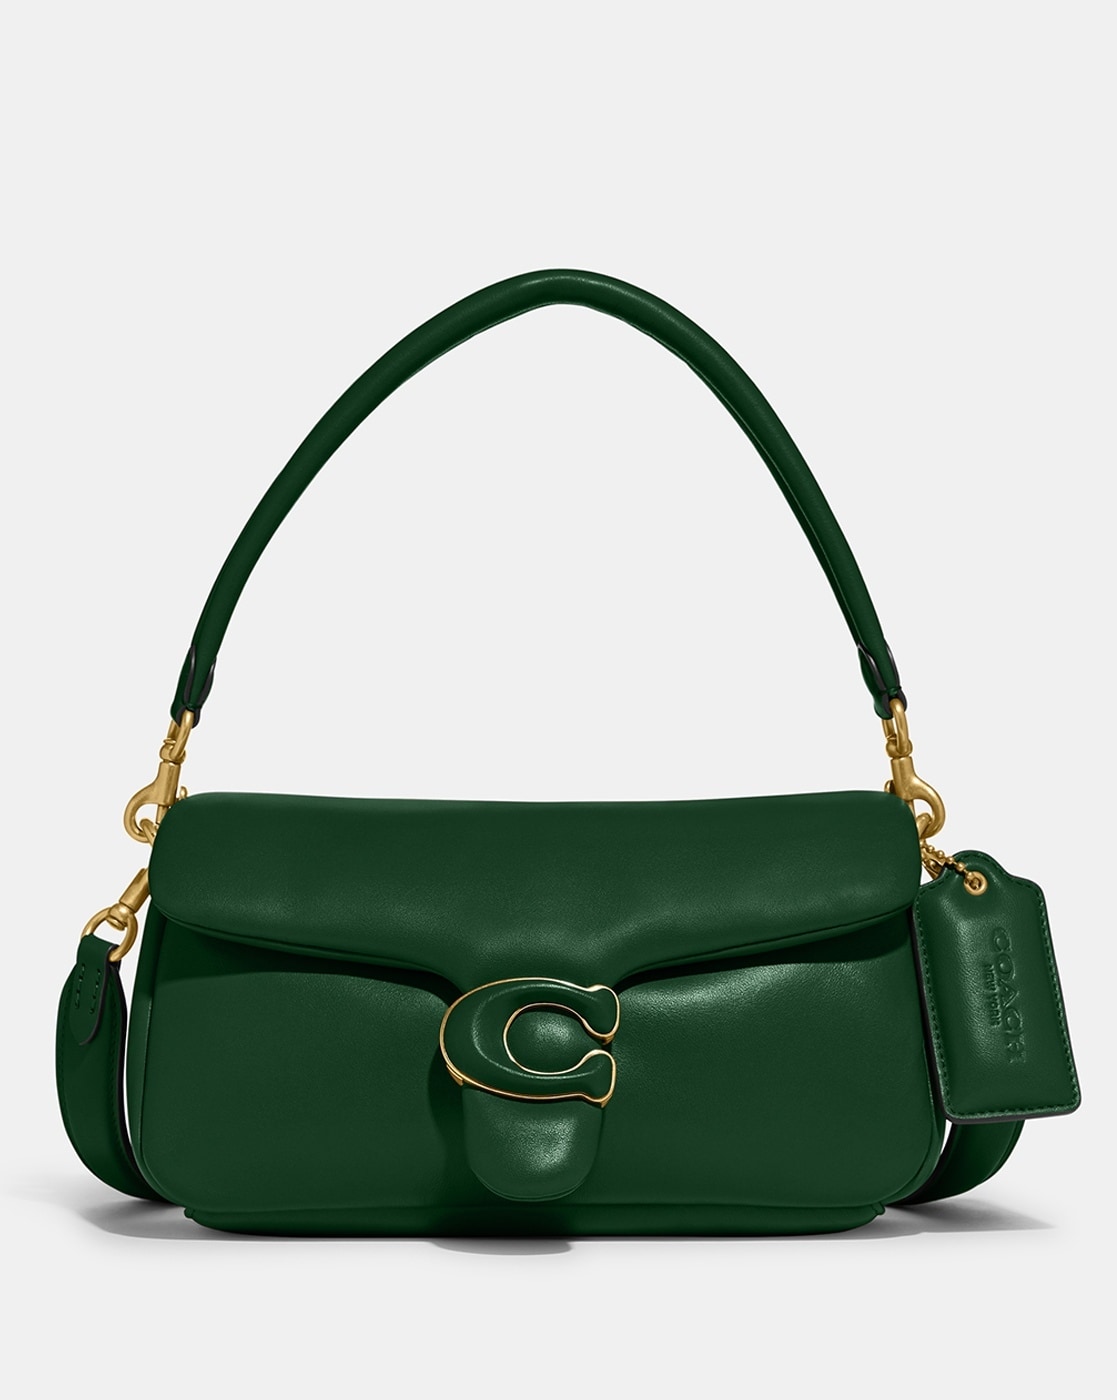 The Best Emerald Green Handbags - Style Charade